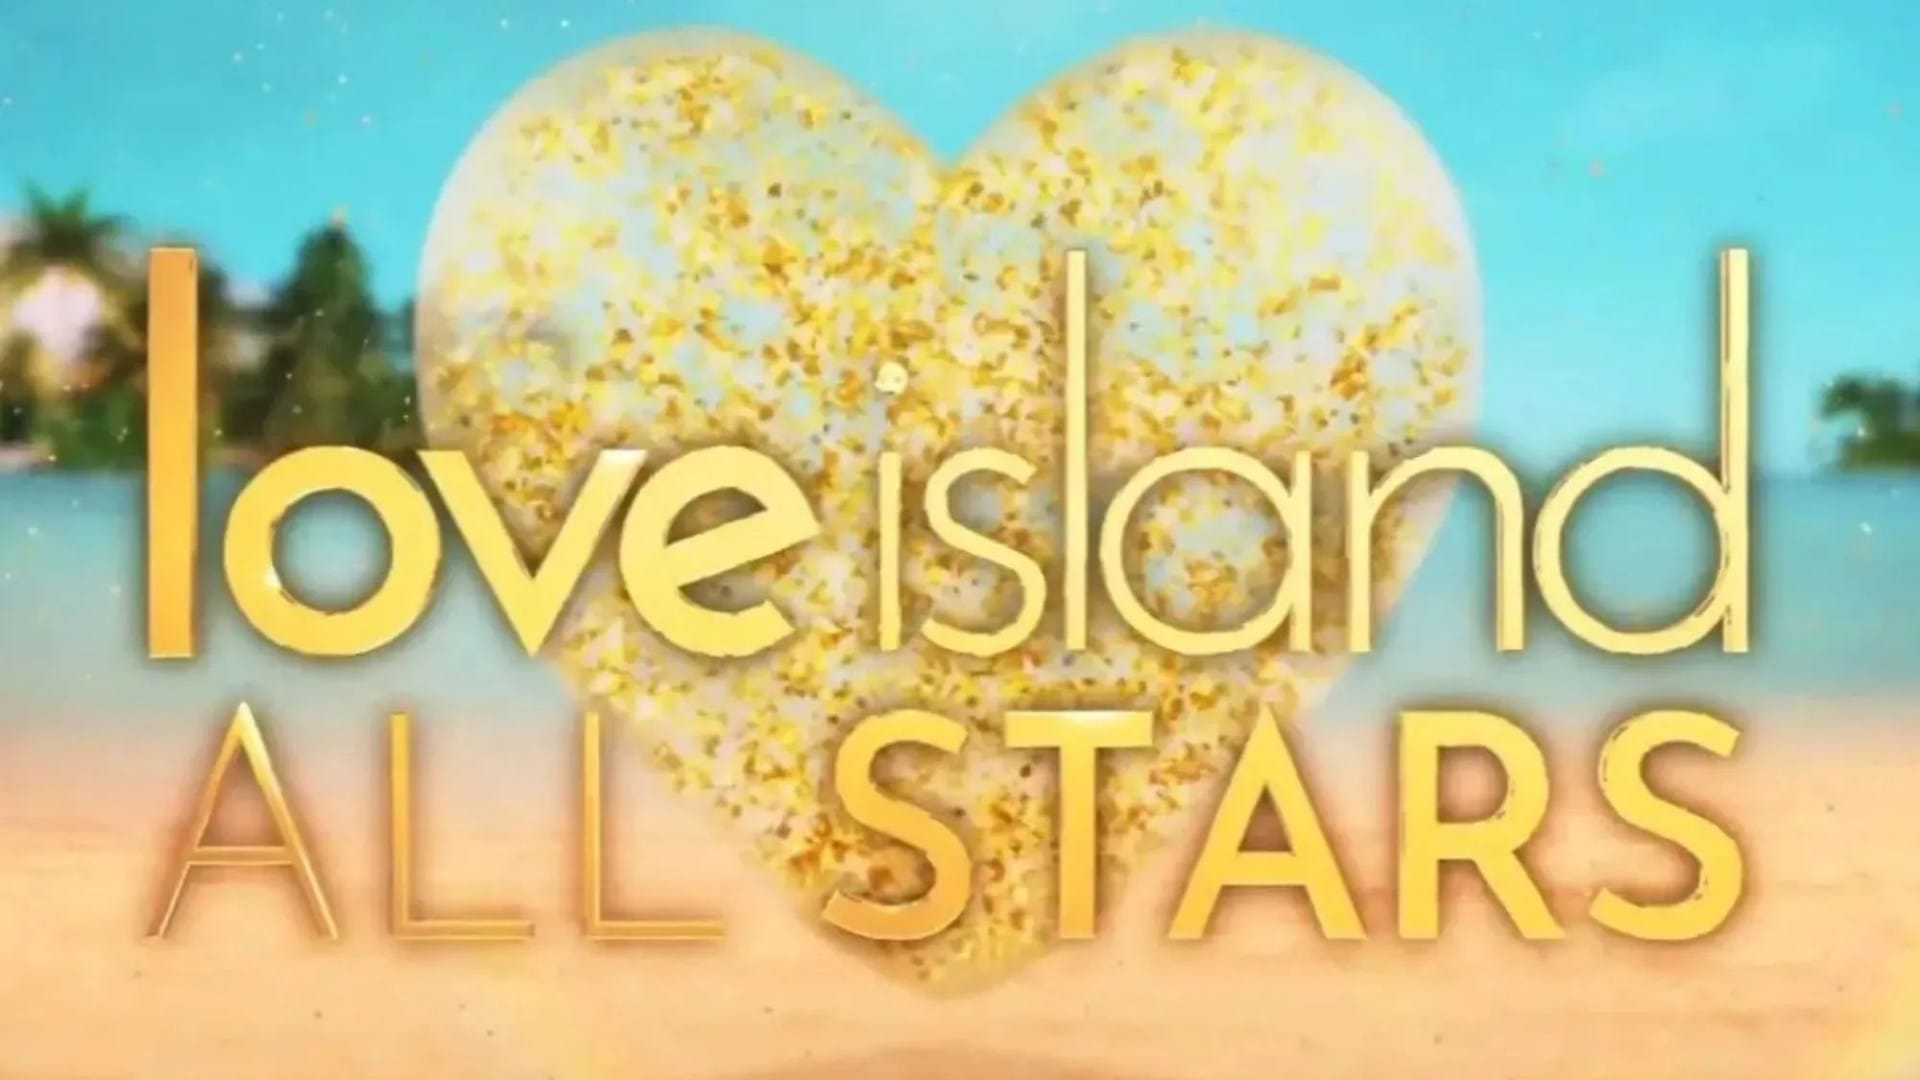 Love Island chaos as new All Stars bombshell enters the villa - and rips apart couple